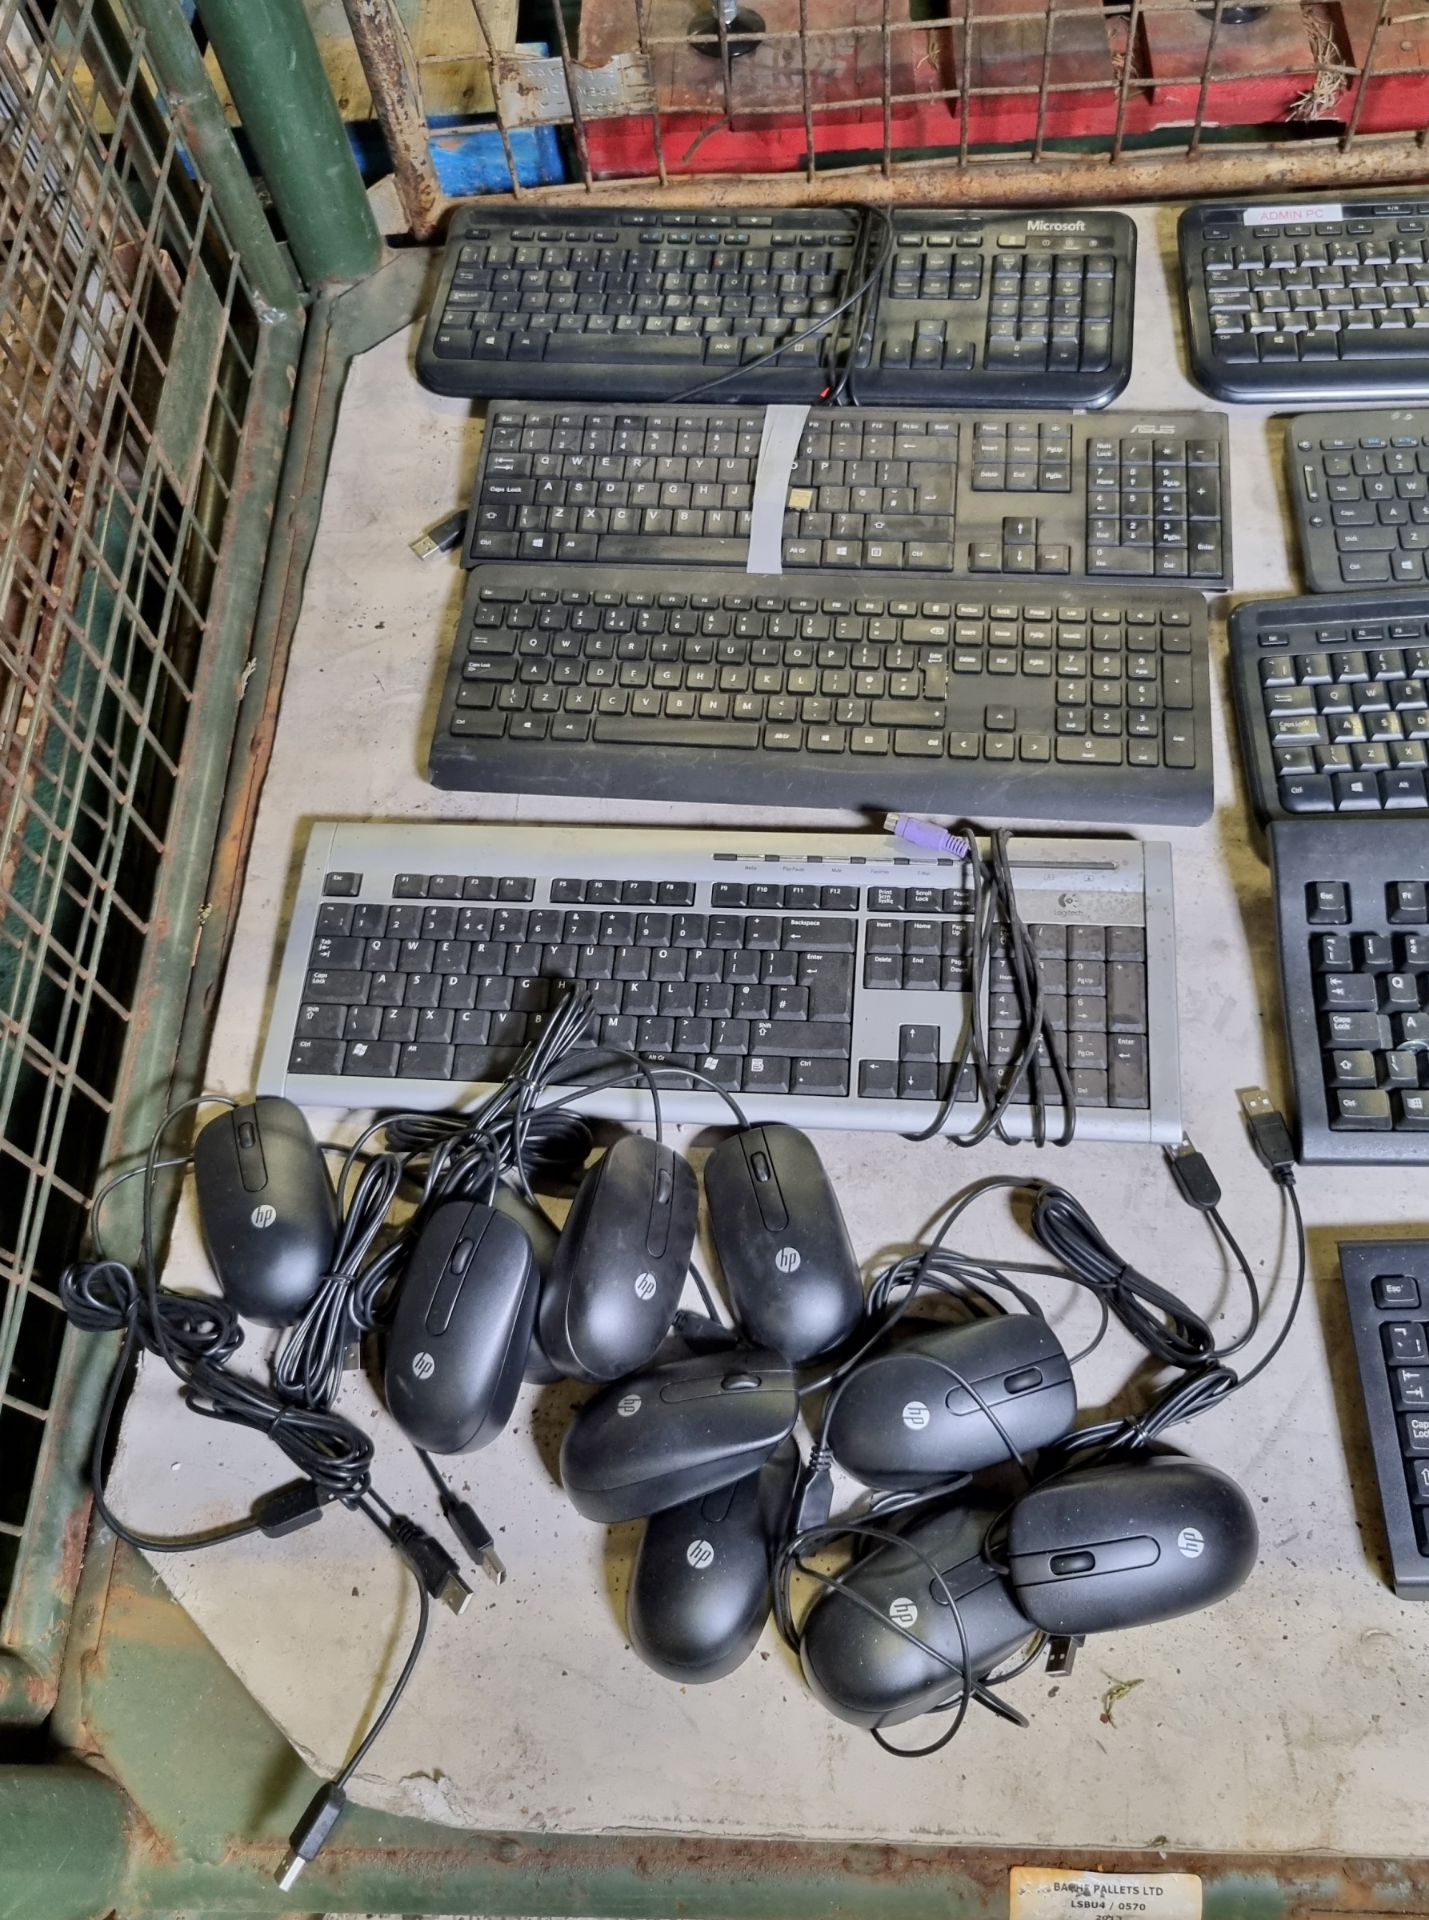 9x wireless and wired keyboards - 10x HP wired mice - Image 4 of 4